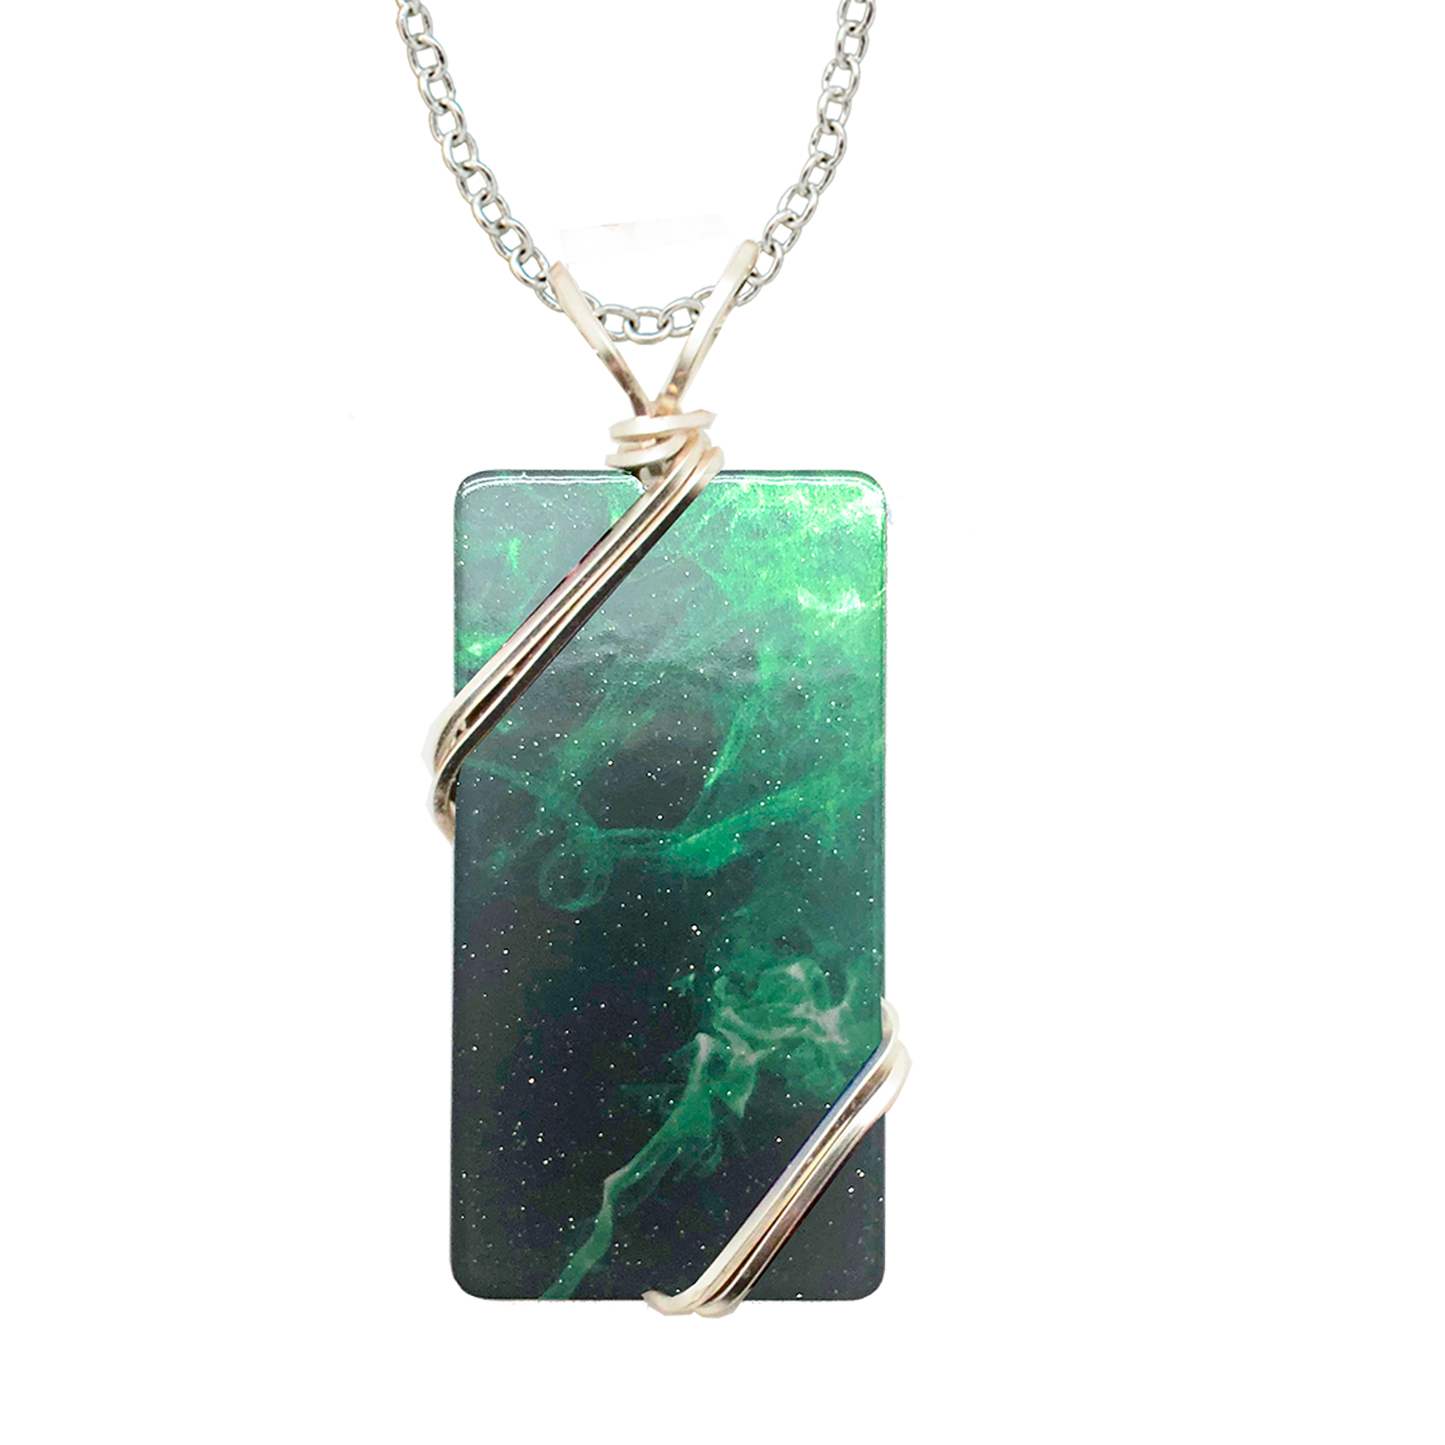 Green Smoke Necklace, 1.5" pendant with silver-plated wiring